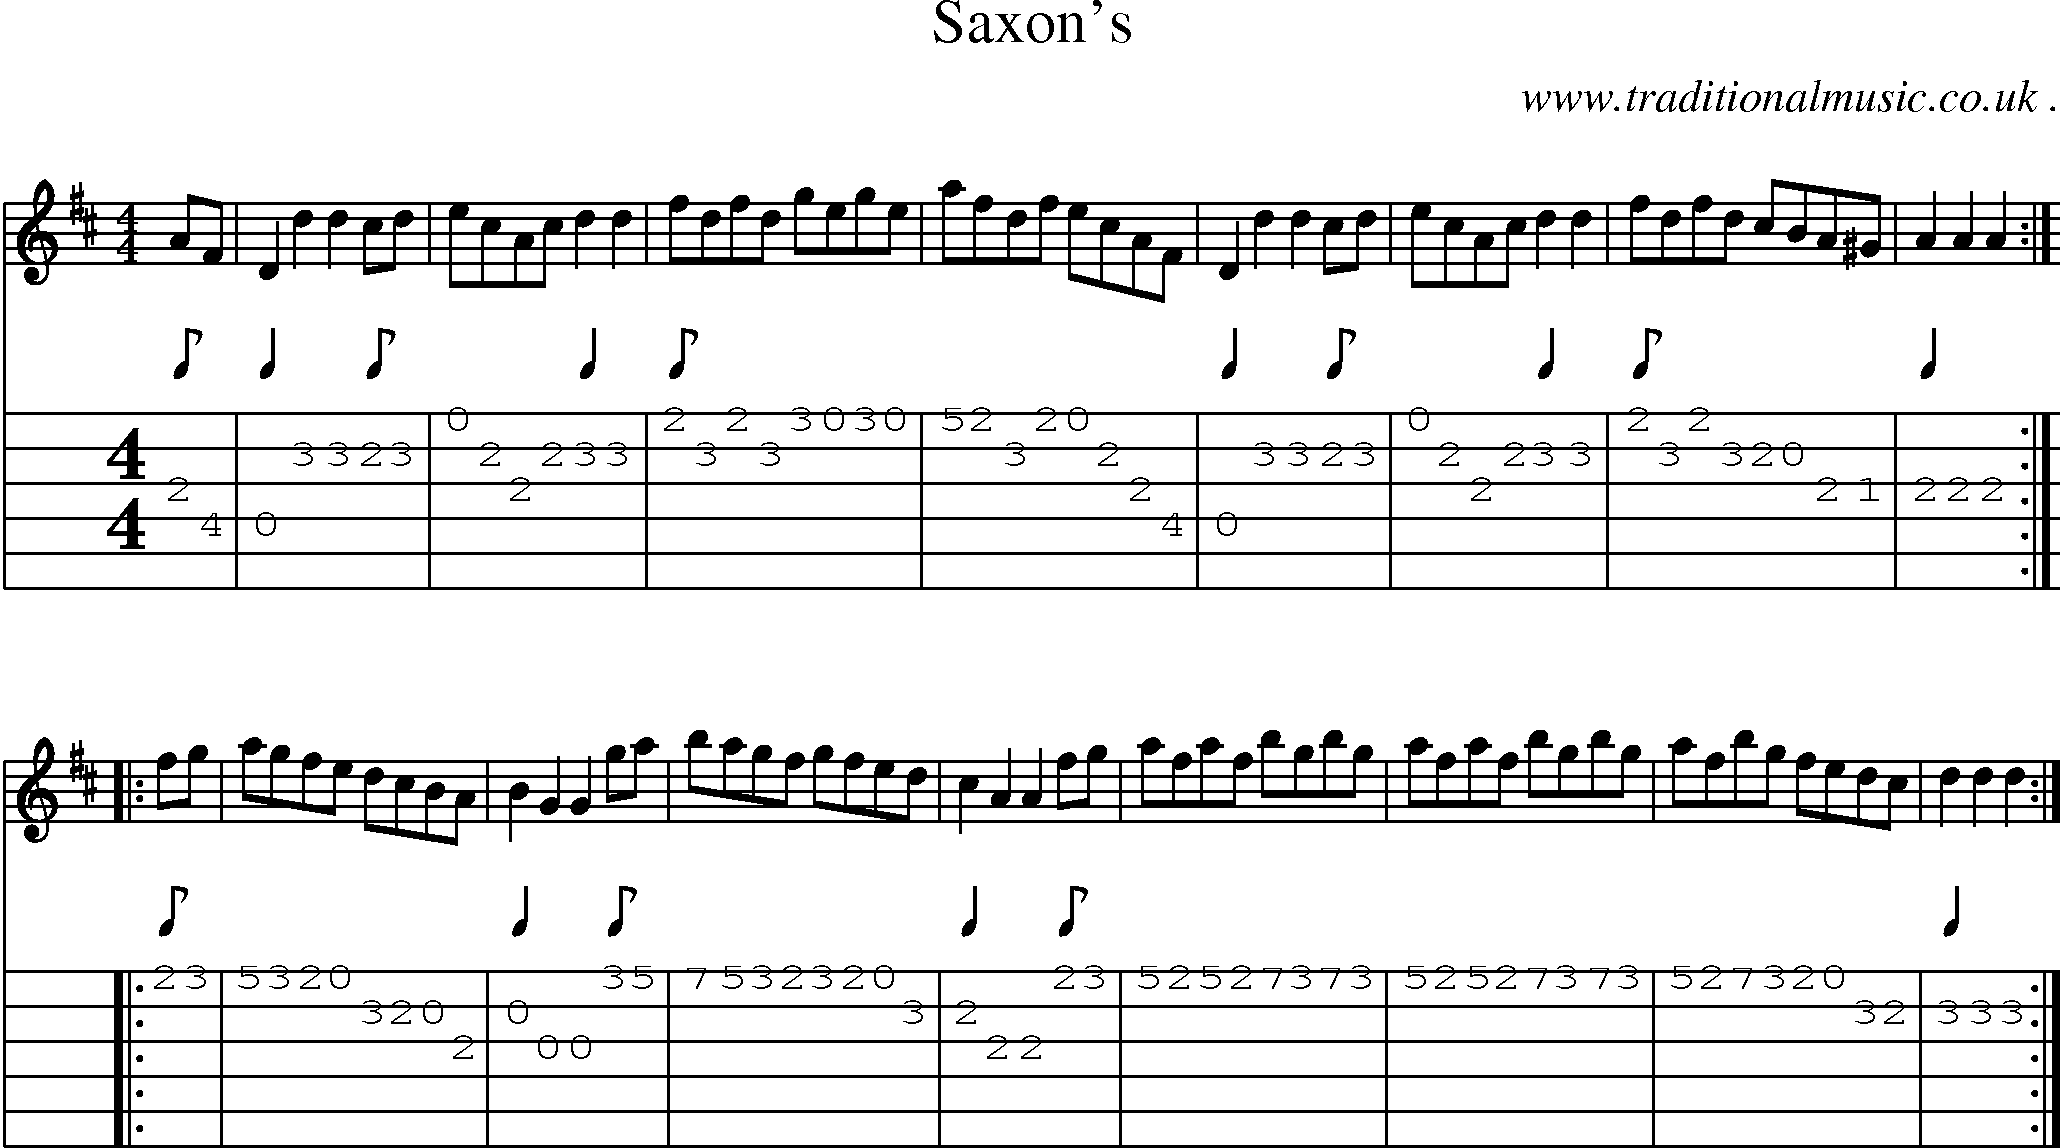 Sheet-Music and Guitar Tabs for Saxons